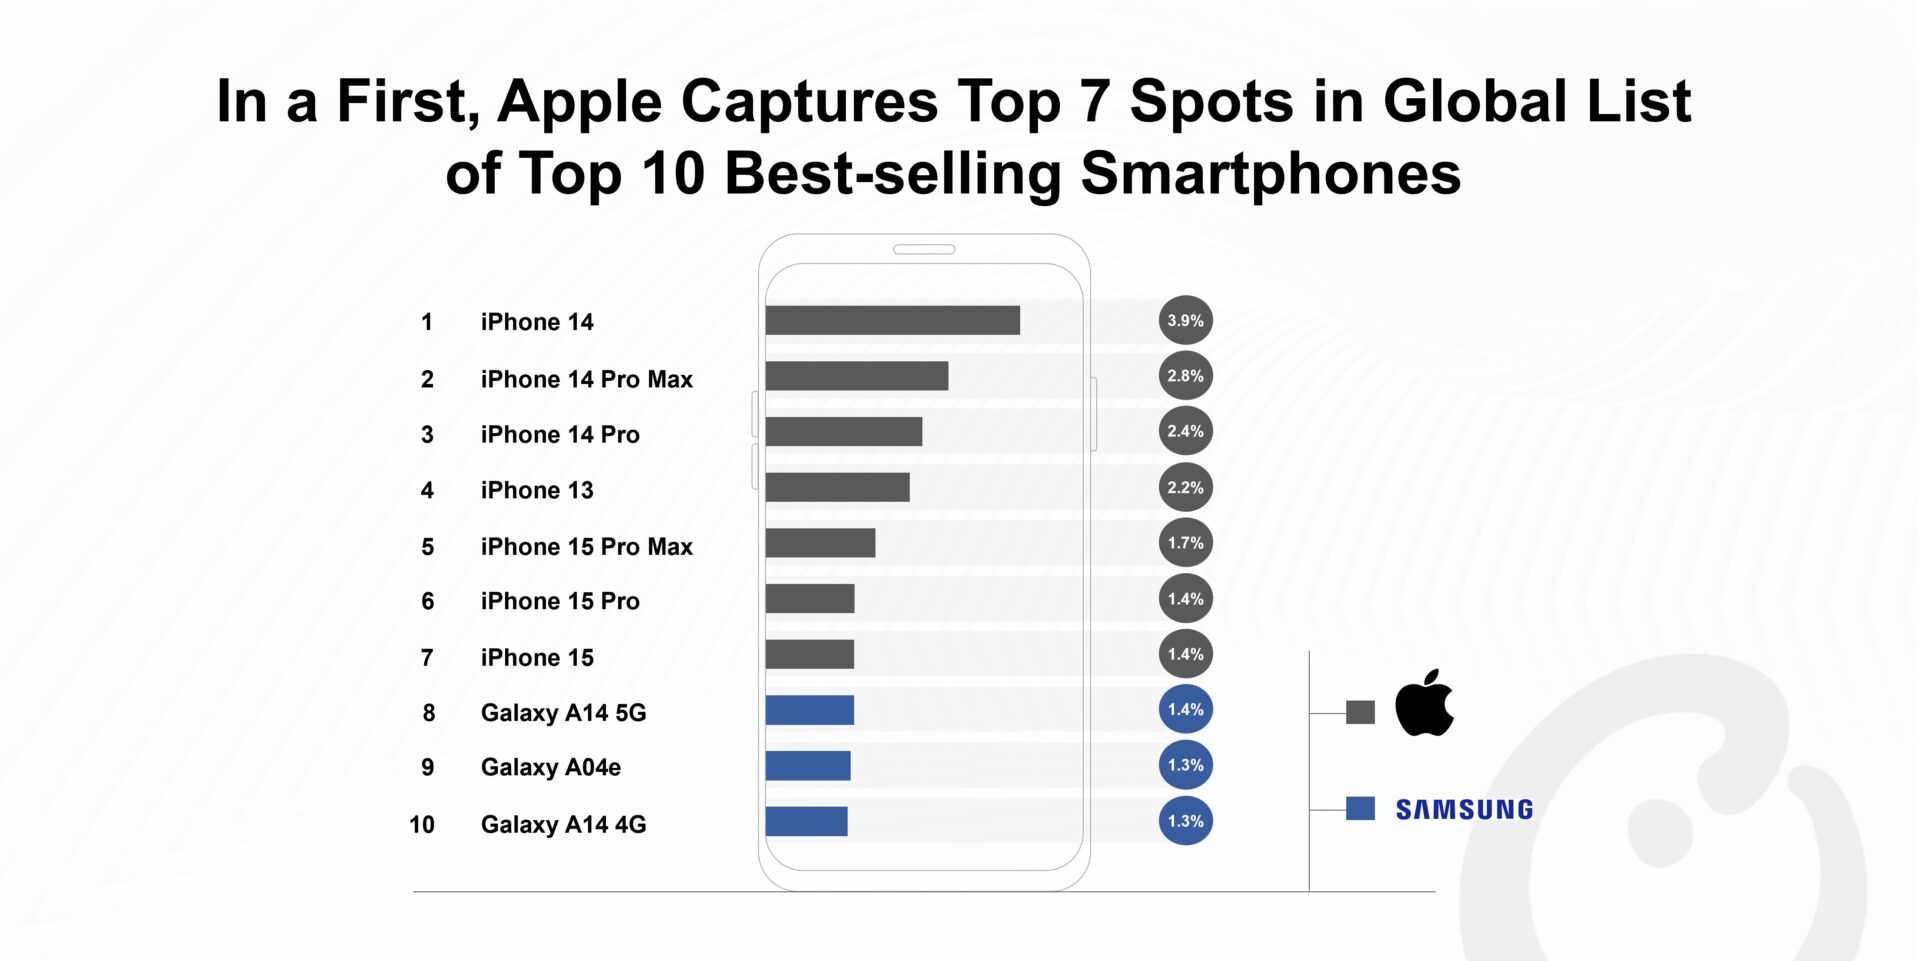 https://www.counterpointresearch.com/wp-content/uploads/2024/02/In-a-First-Apple-Captures-Top-7-Spots-in-Global-List-of-Top-10-Best-selling-Smartphones.jpg